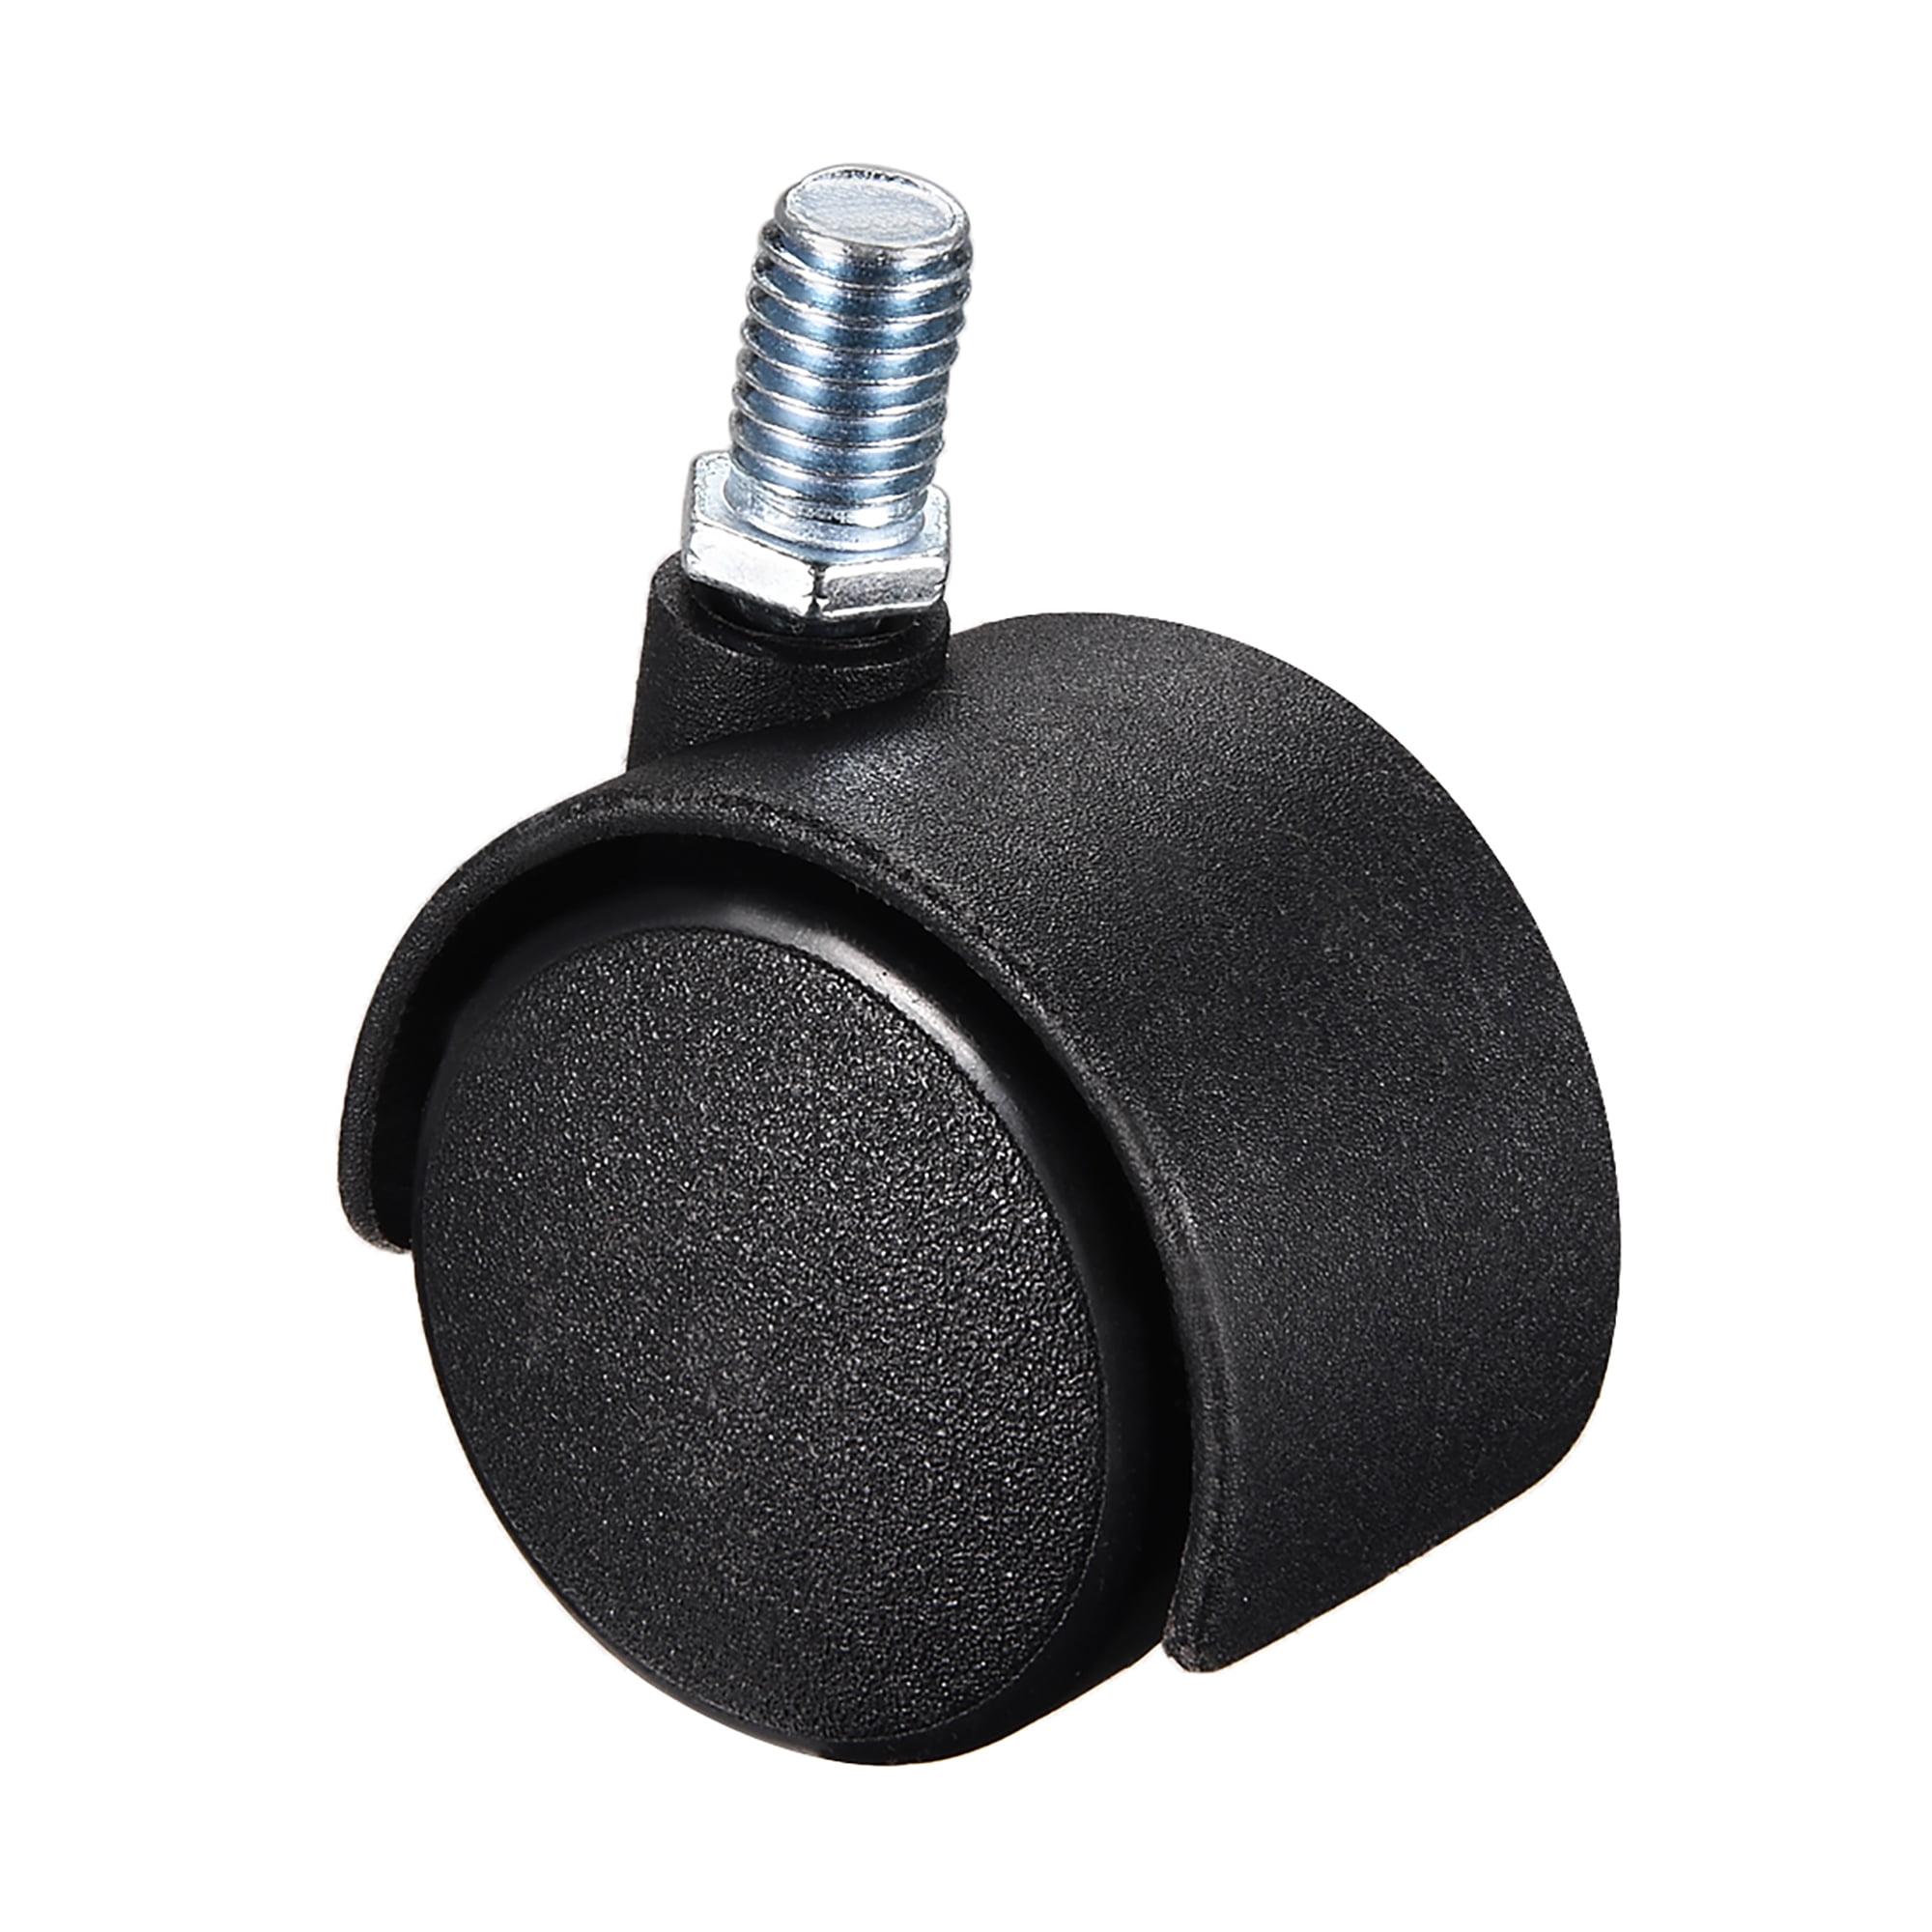 1.5'' Rubber Swivel Stem Caster Wheel Replacement M10 for Carts Chairs 